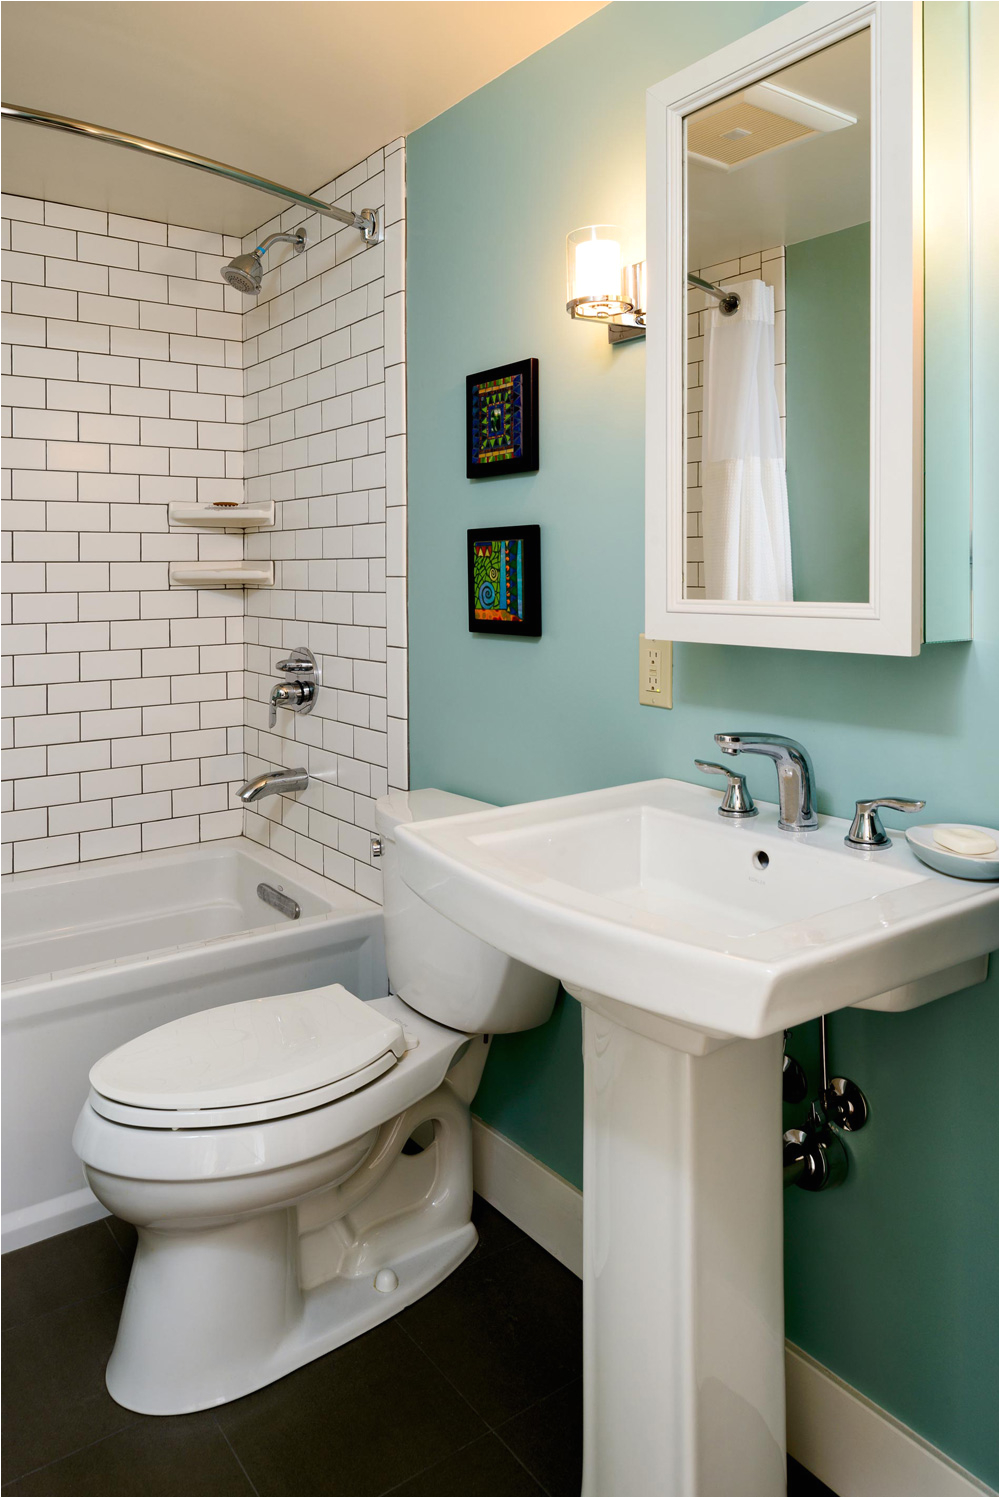 5 creative solutions small bathrooms